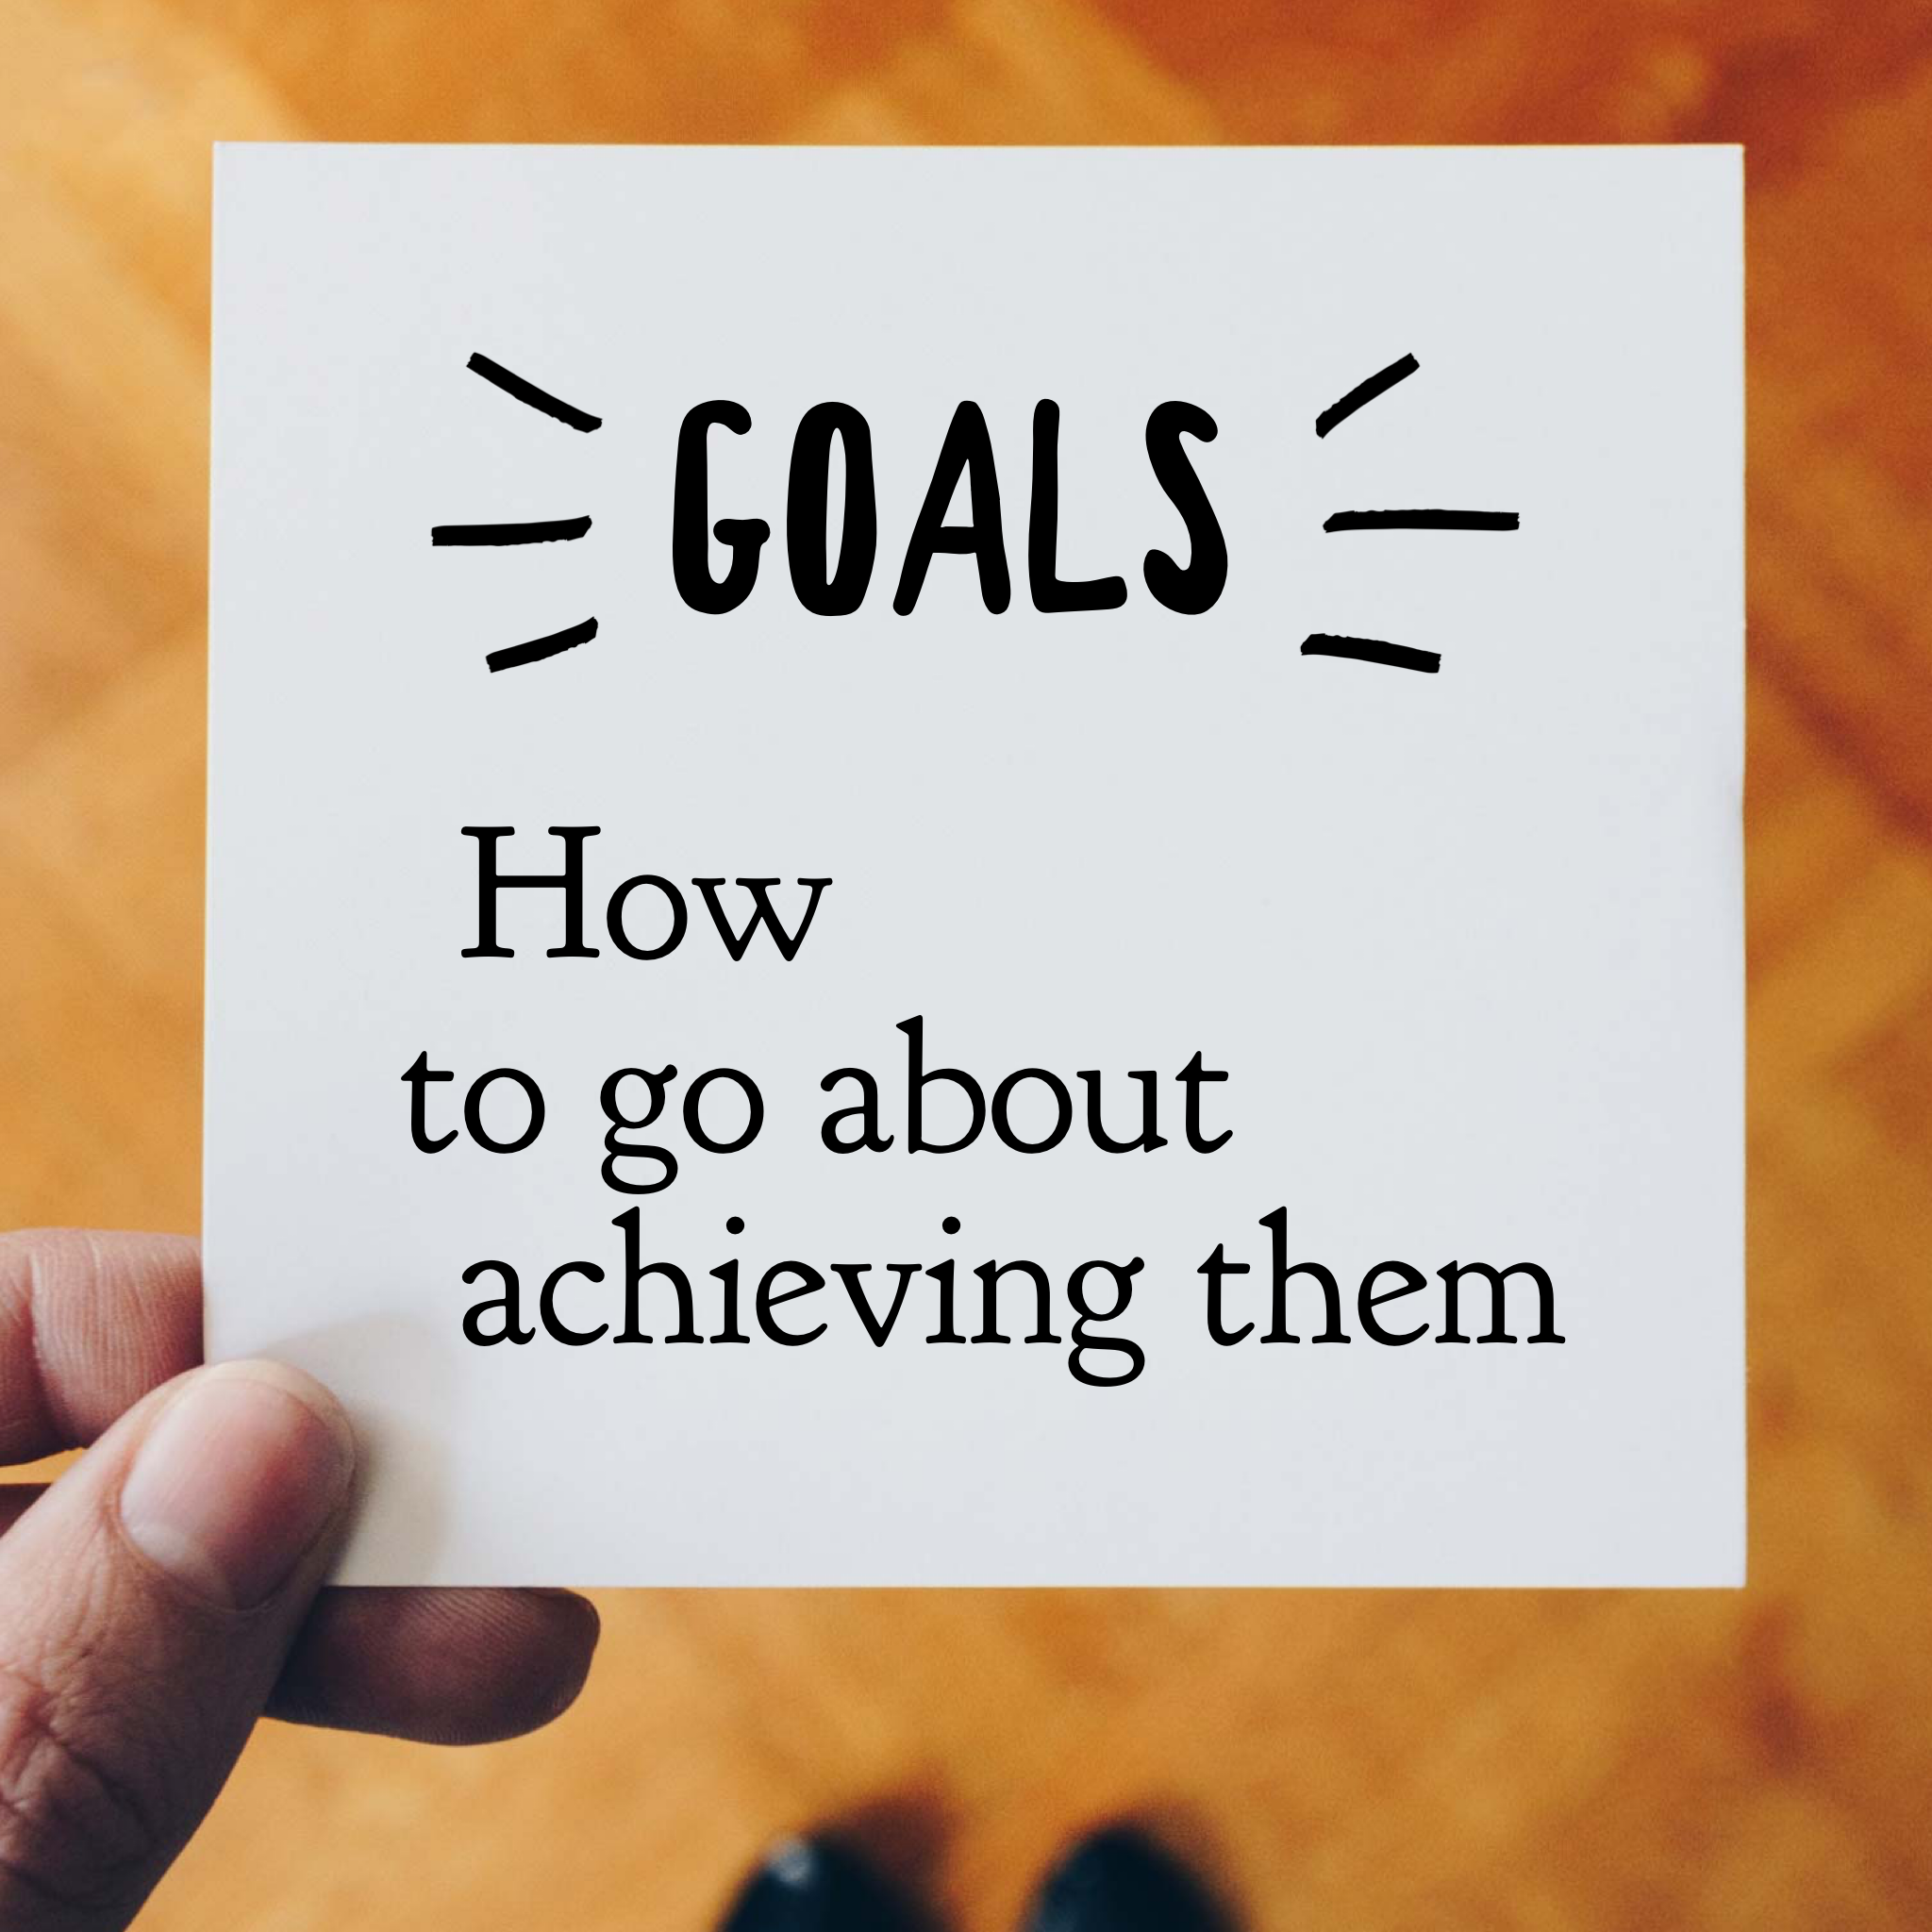 Goals - how to go about achieving them